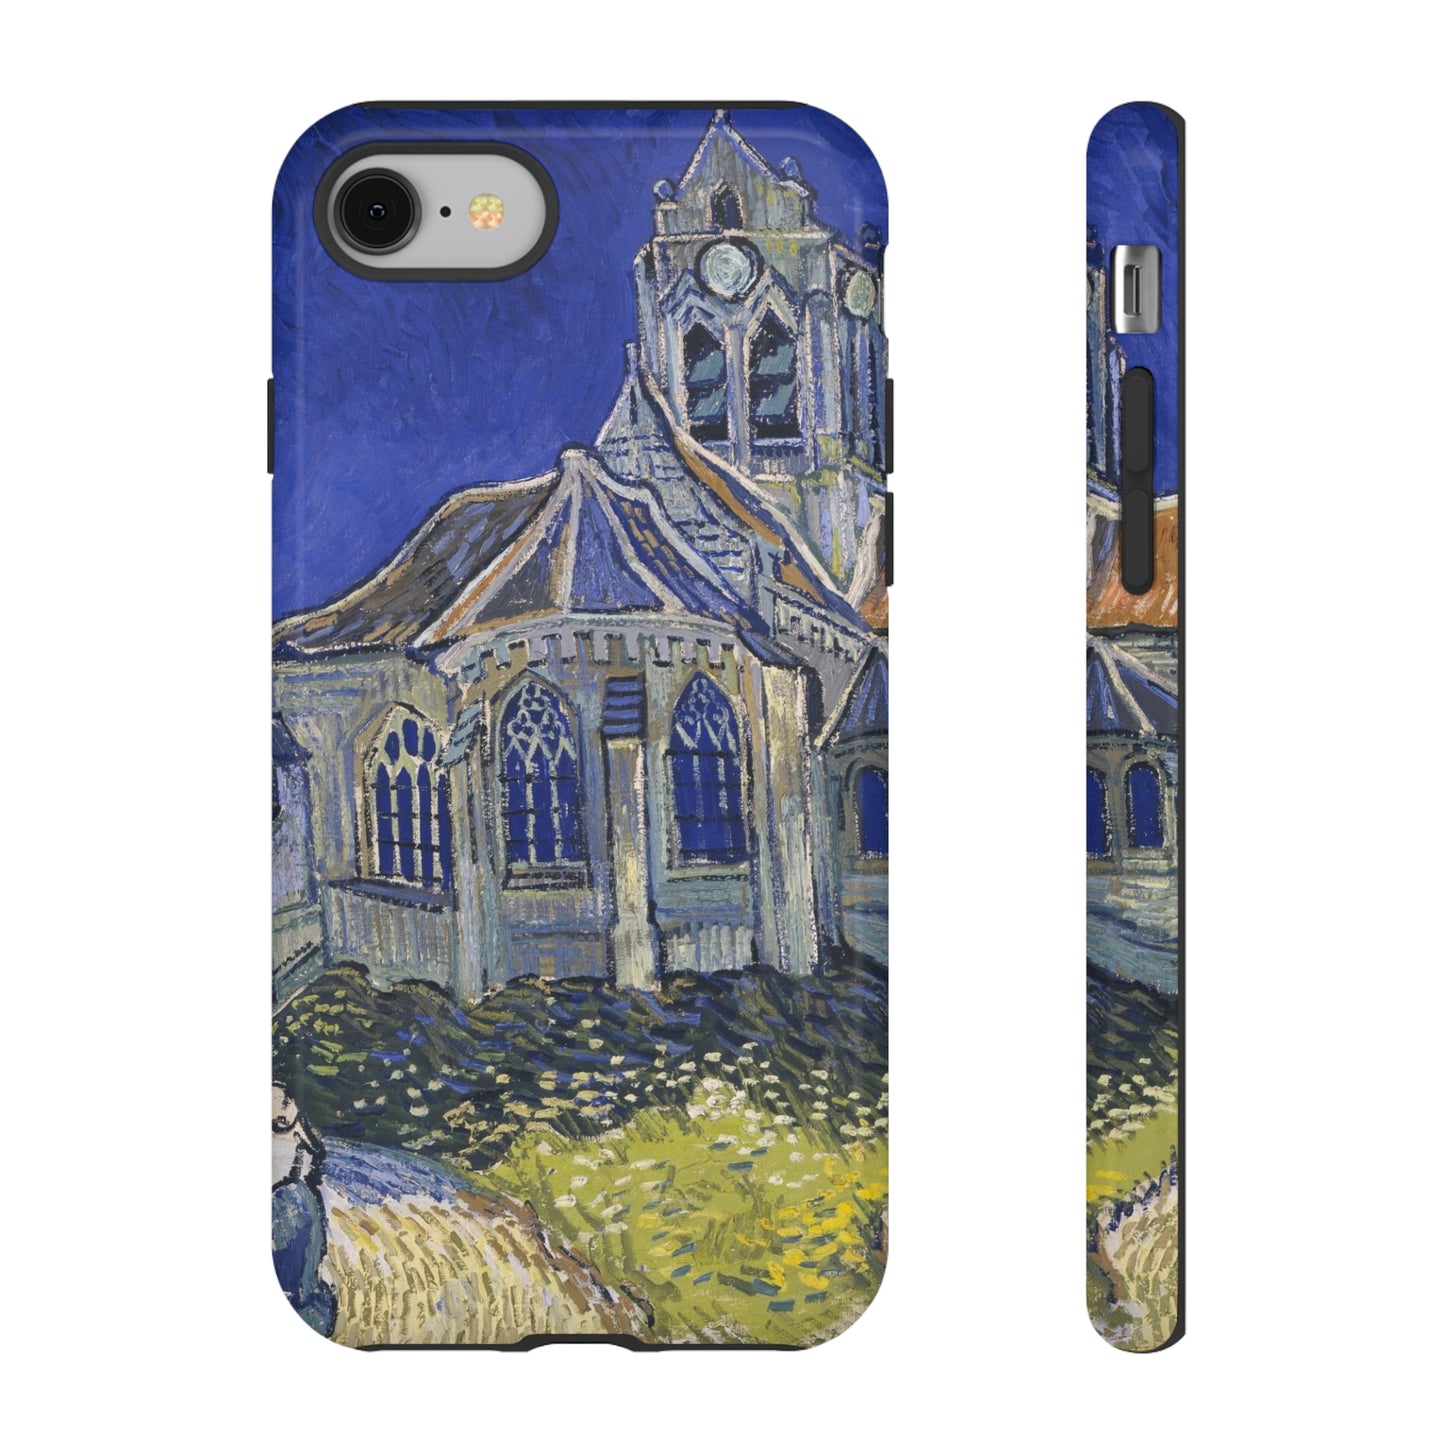 The Church in Auvers sur Oise by Vincent Van Gogh - Cell Phone Case